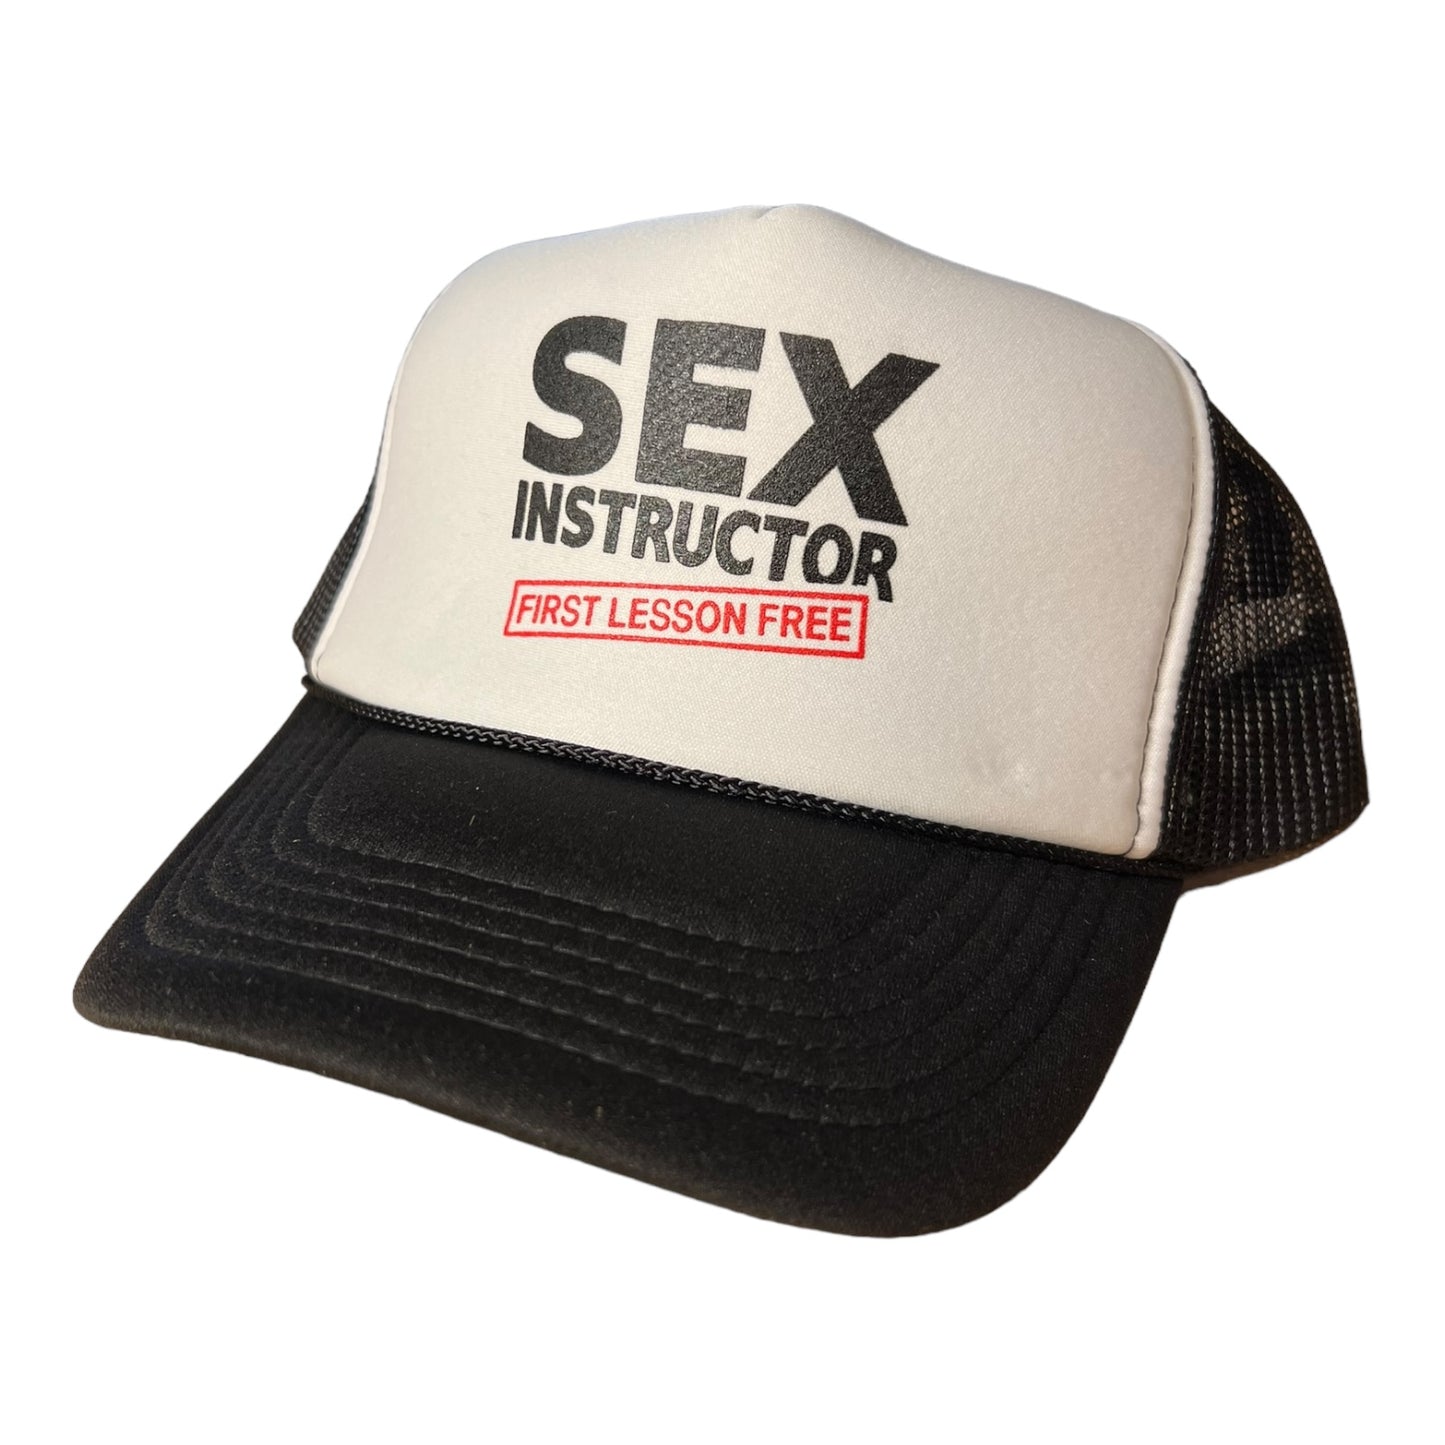 Funny Instructor First Lesson Free Trucker Hat Funny Trucker Hat Black/White